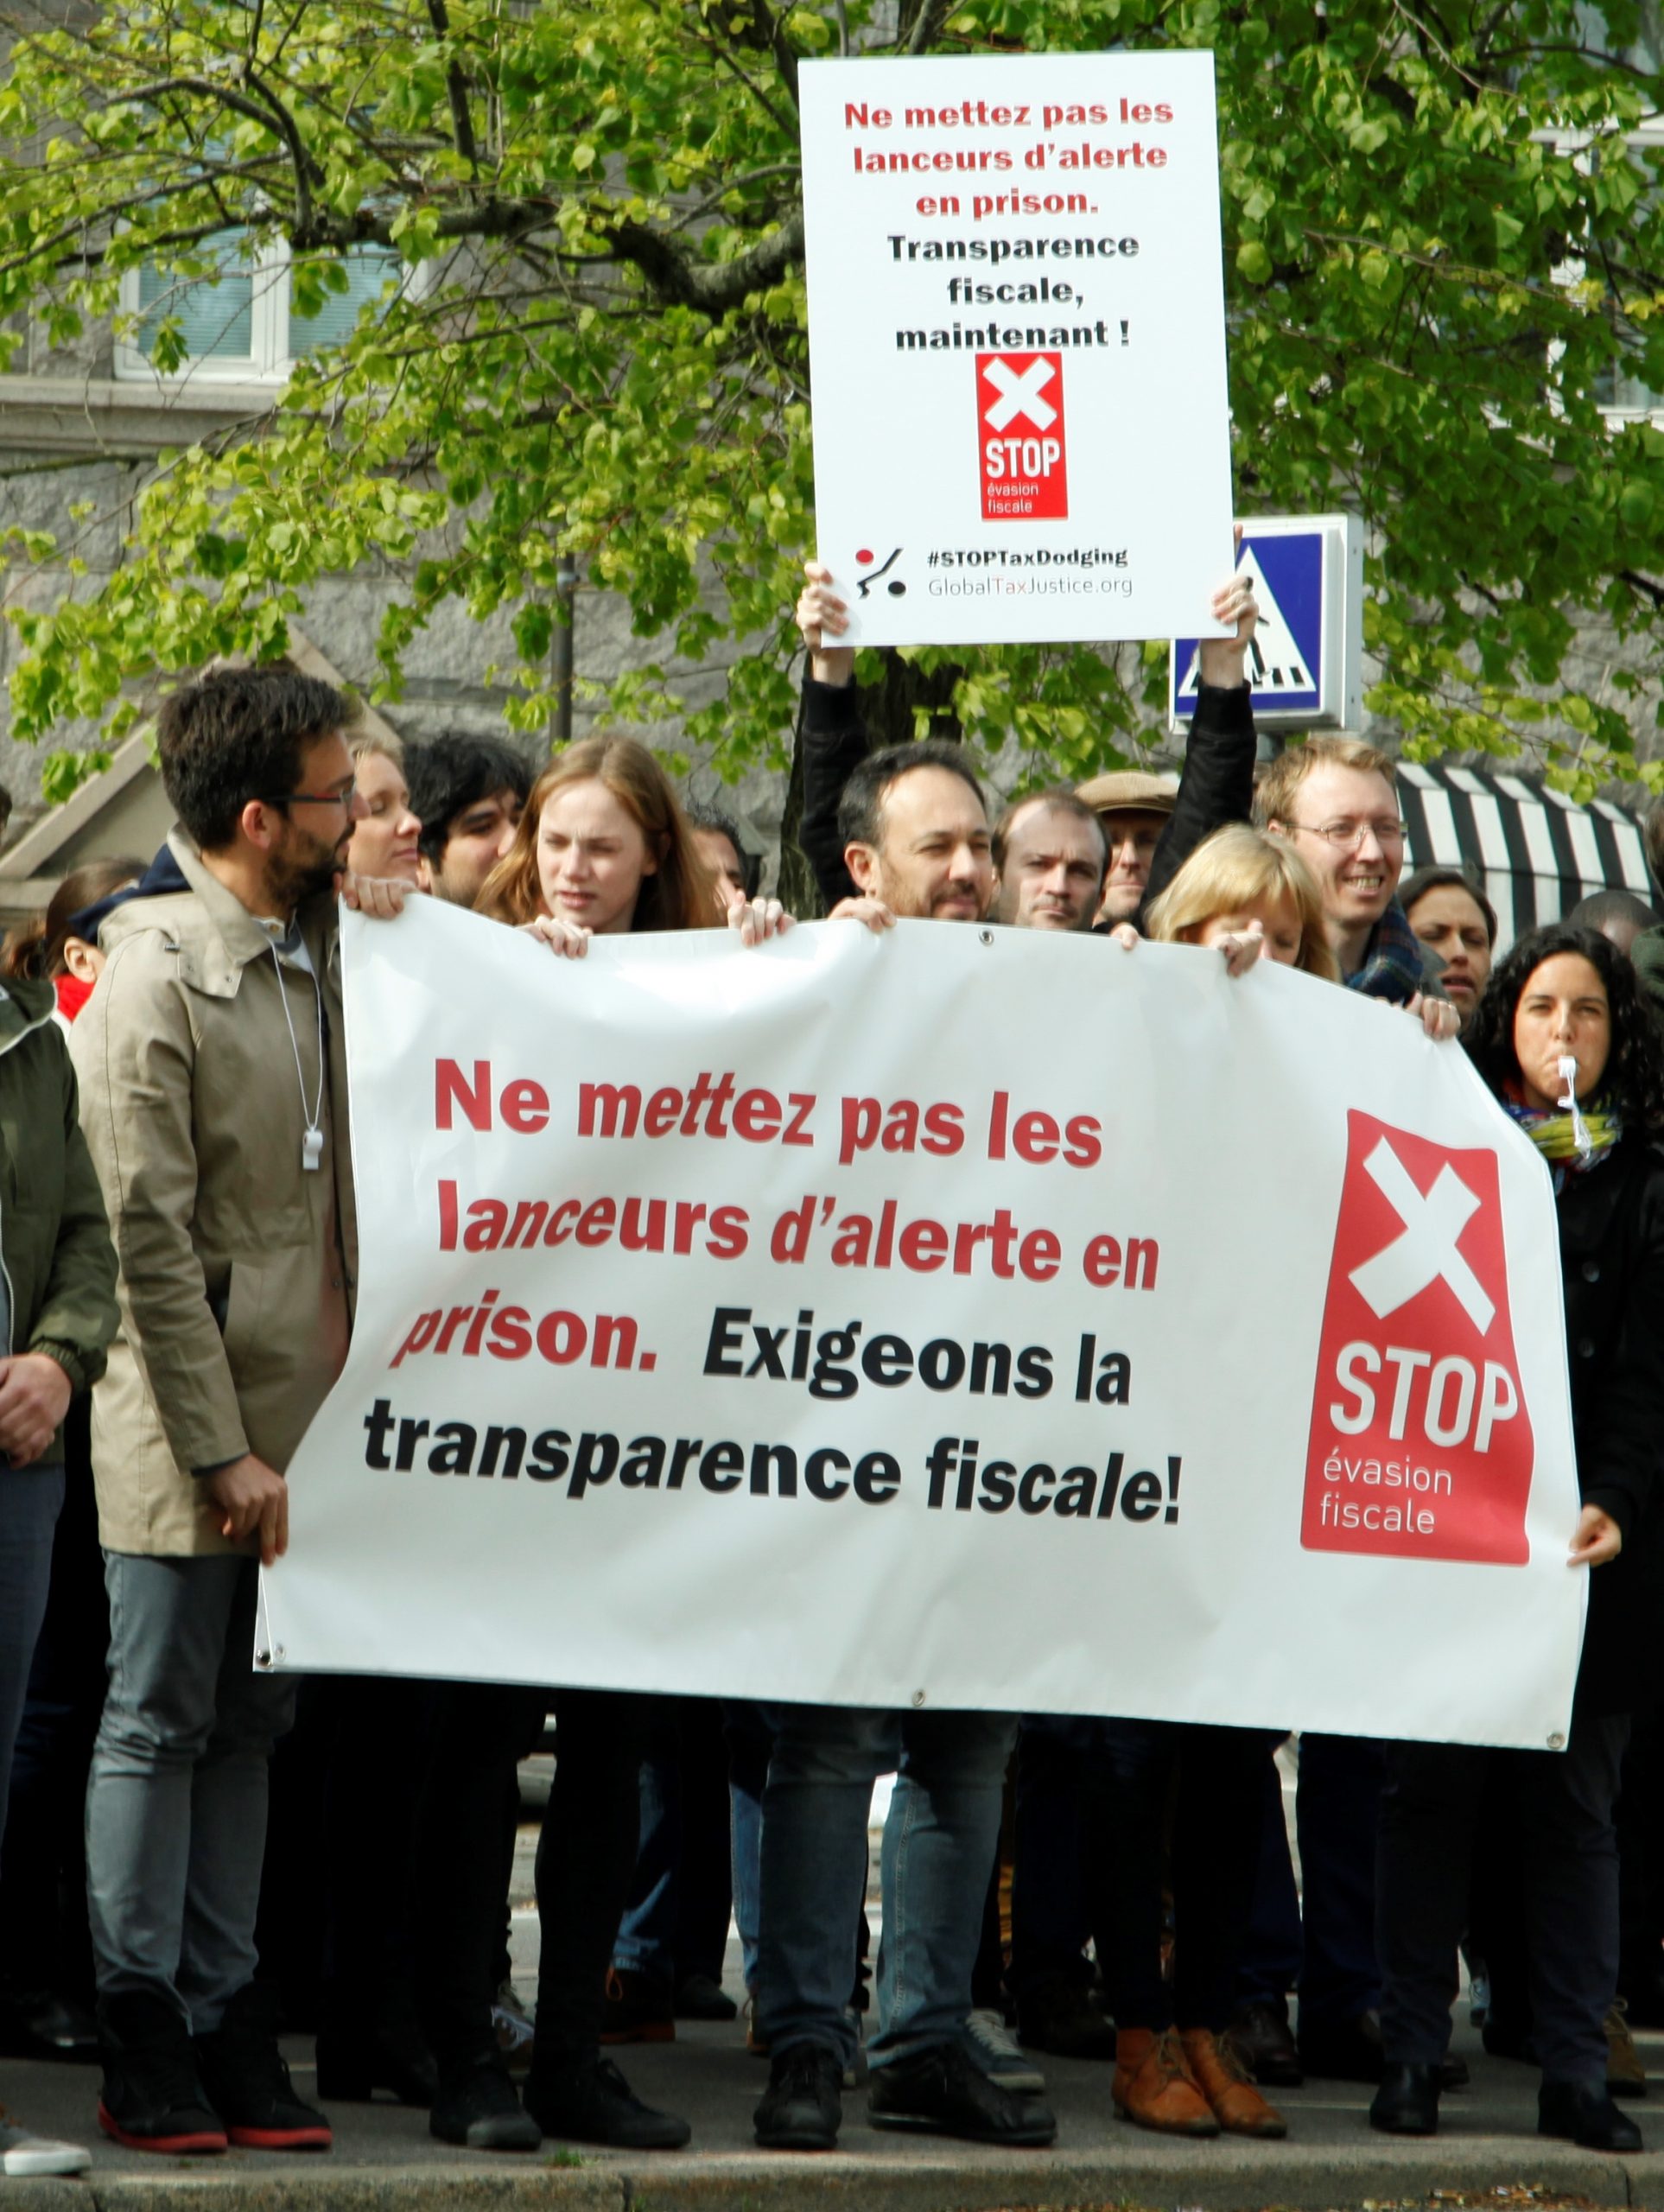 Demonstrators protest Luxembourg's treatment of whistleblowers - May 2015